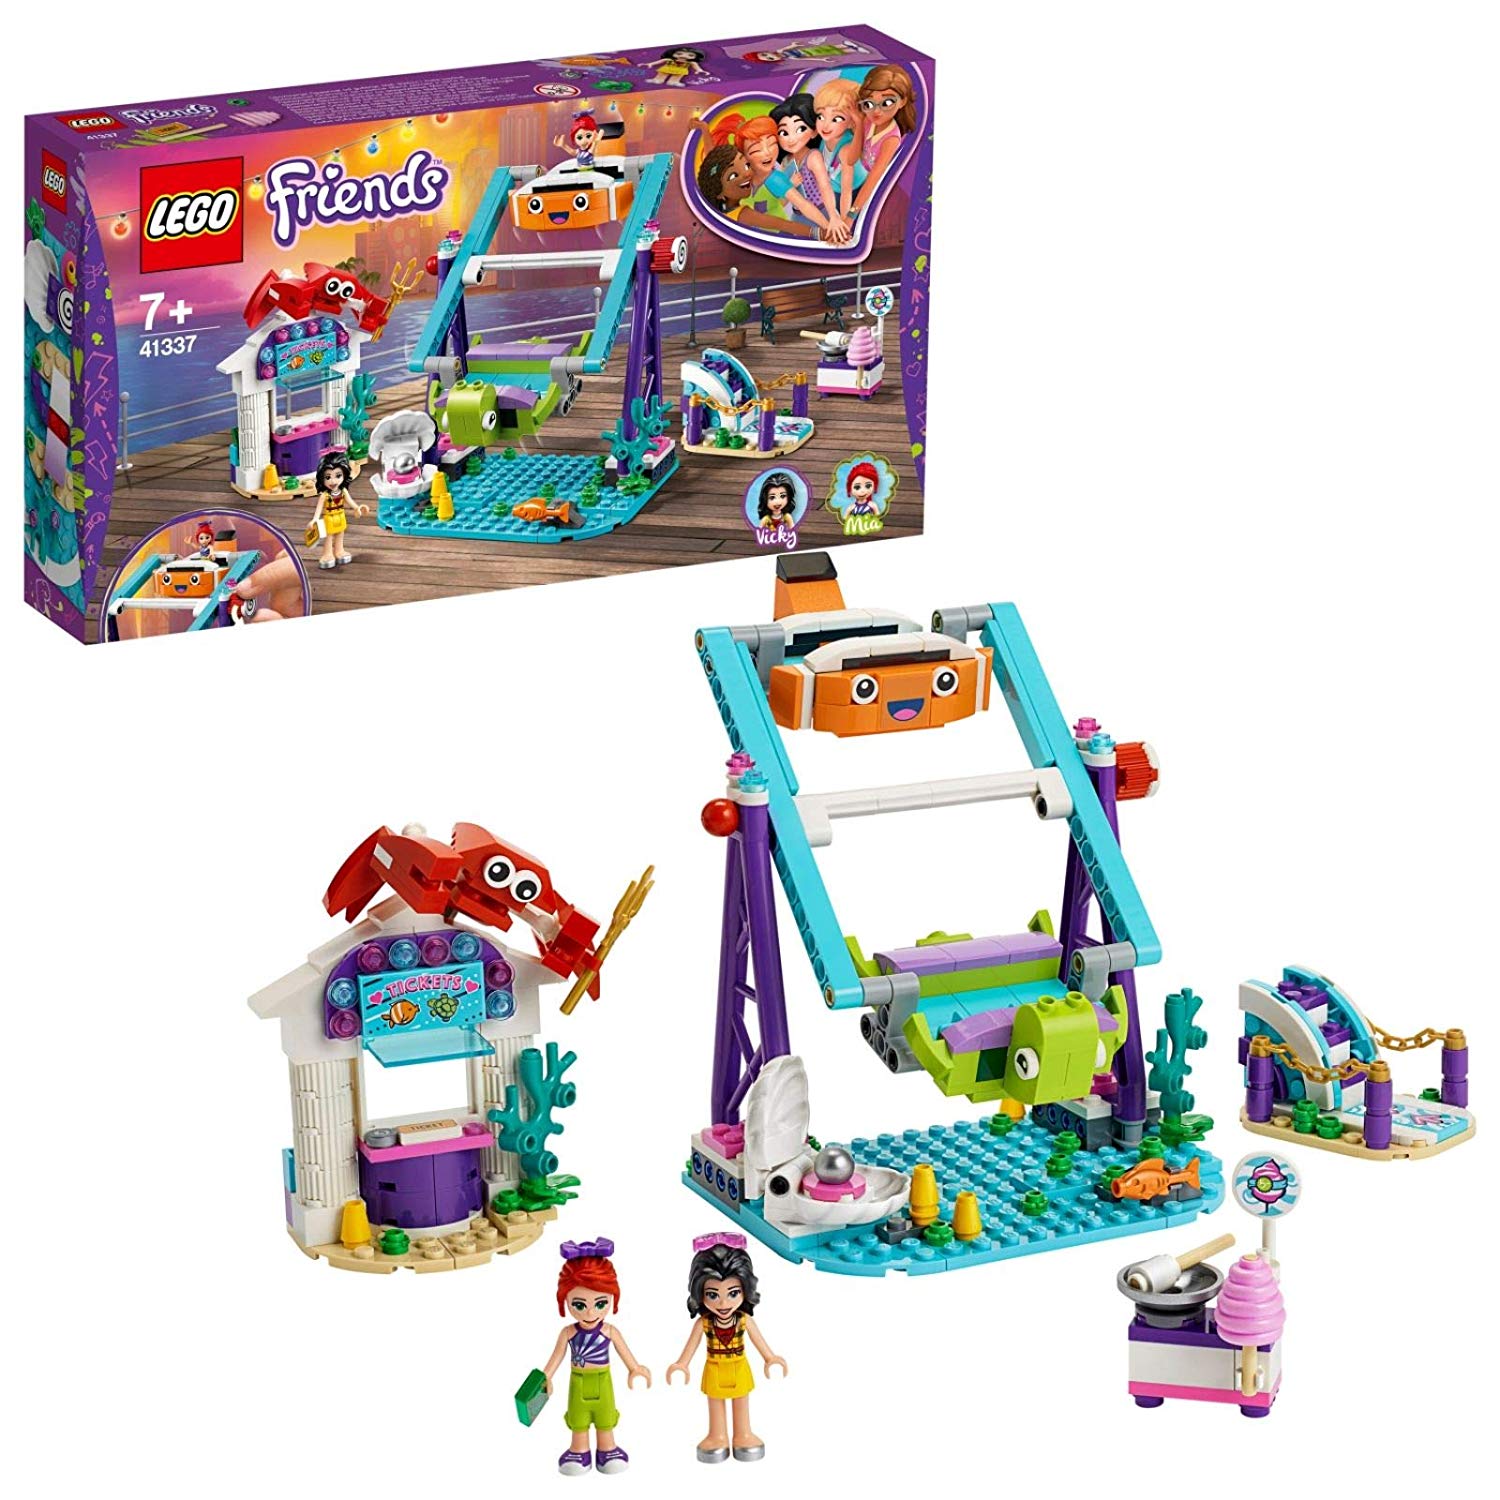 Lego 41337 - Friends Swing With A Loop In The Amusement Park Building Set